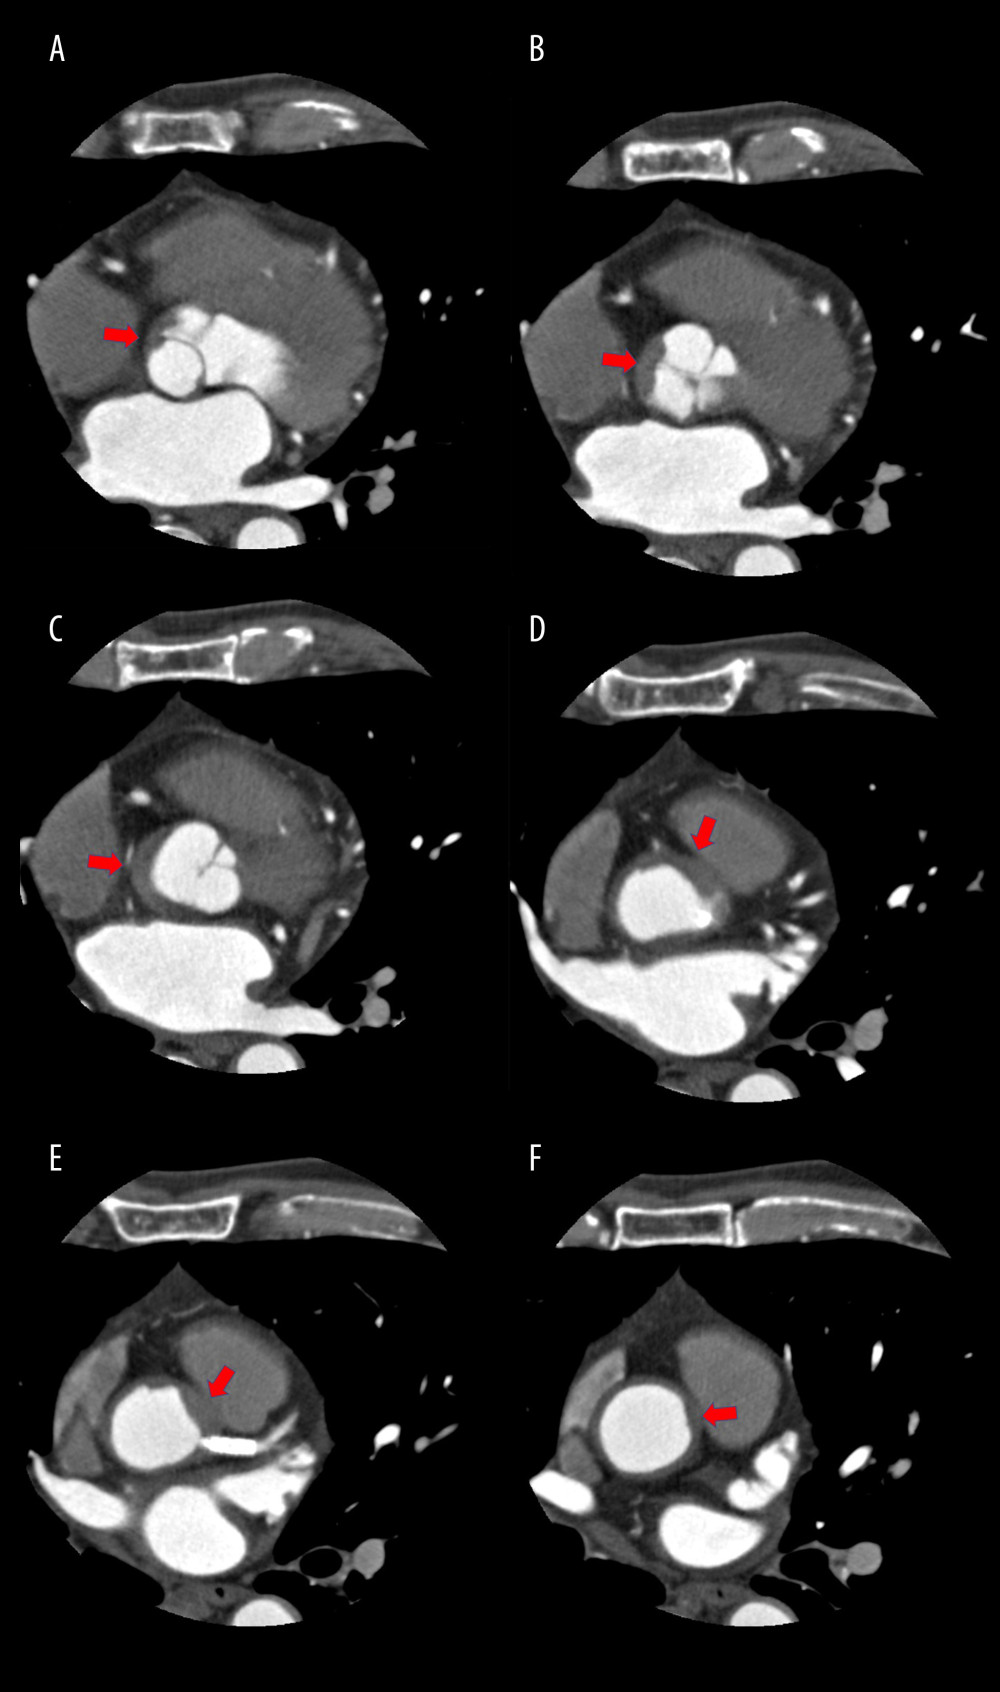 (A–F) A cardiac computed tomography scan series revealed a plaque-like aortic mural lesion in the ascending aorta near the beginning of the coronary artery (arrow).